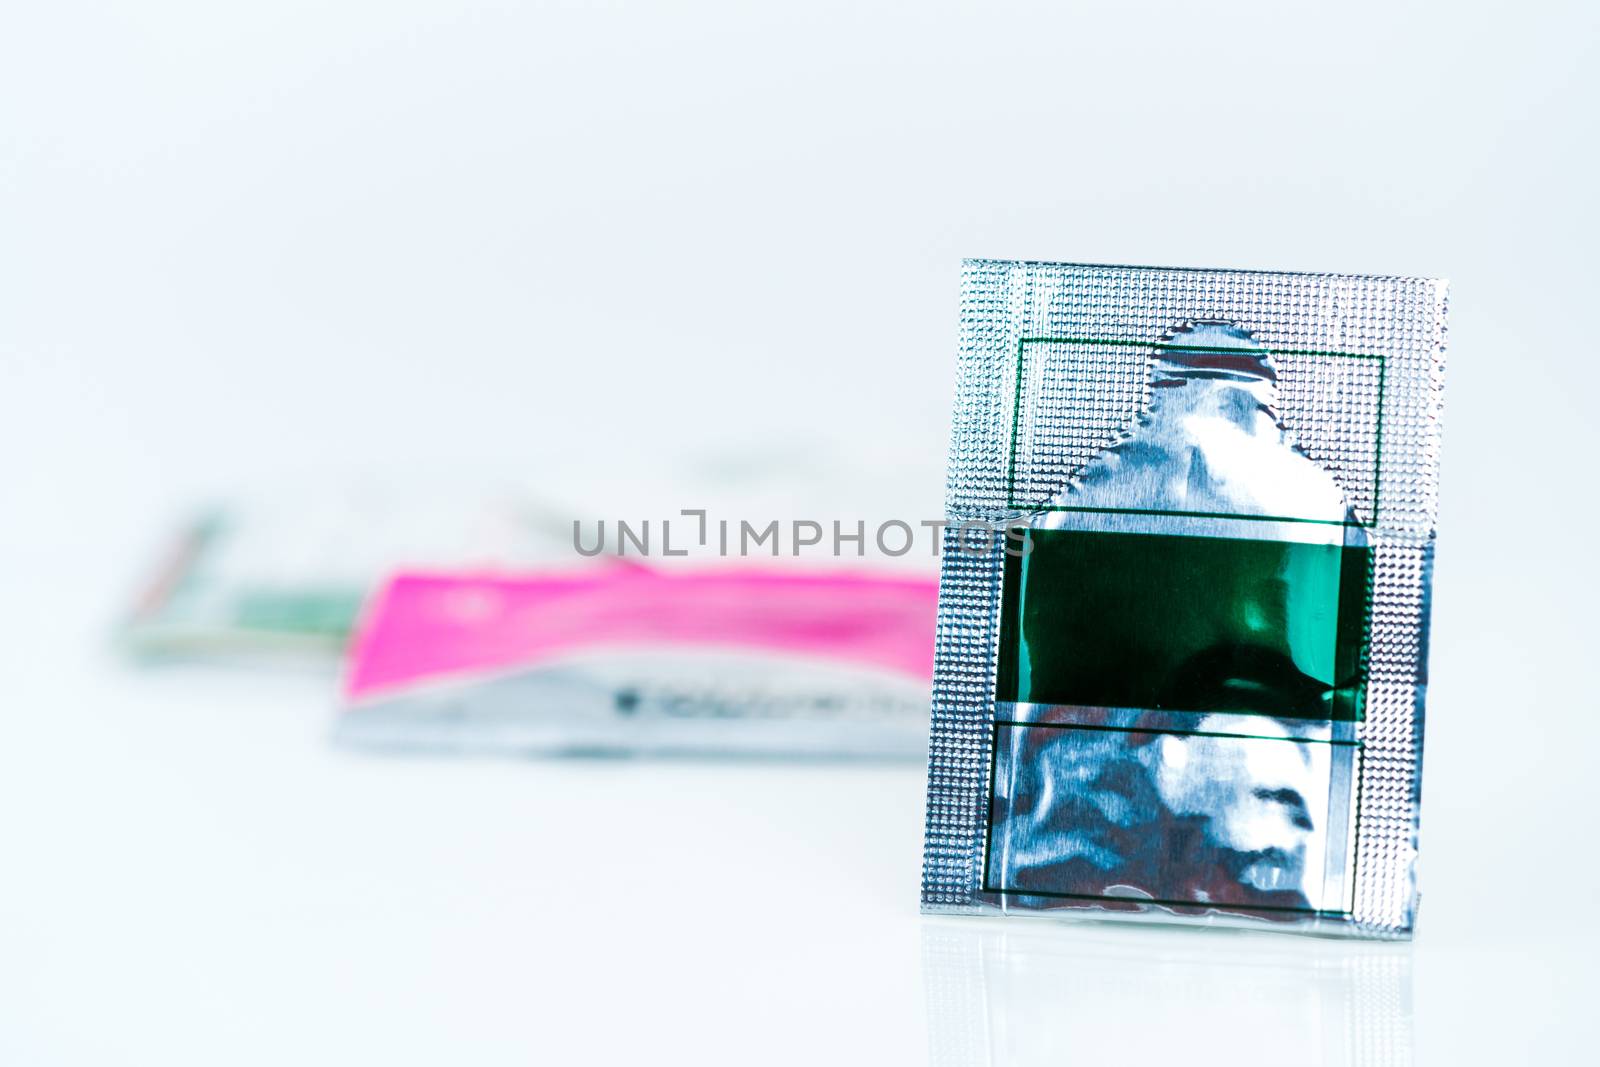 Mild steroid oral paste in aluminium foil sachet on blur background of sachets. Anti-inflammatory for oral mucous membrane, relief oral tenderness, pain, and ulceration. Aphthous ulcer or mouth ulcers by Fahroni